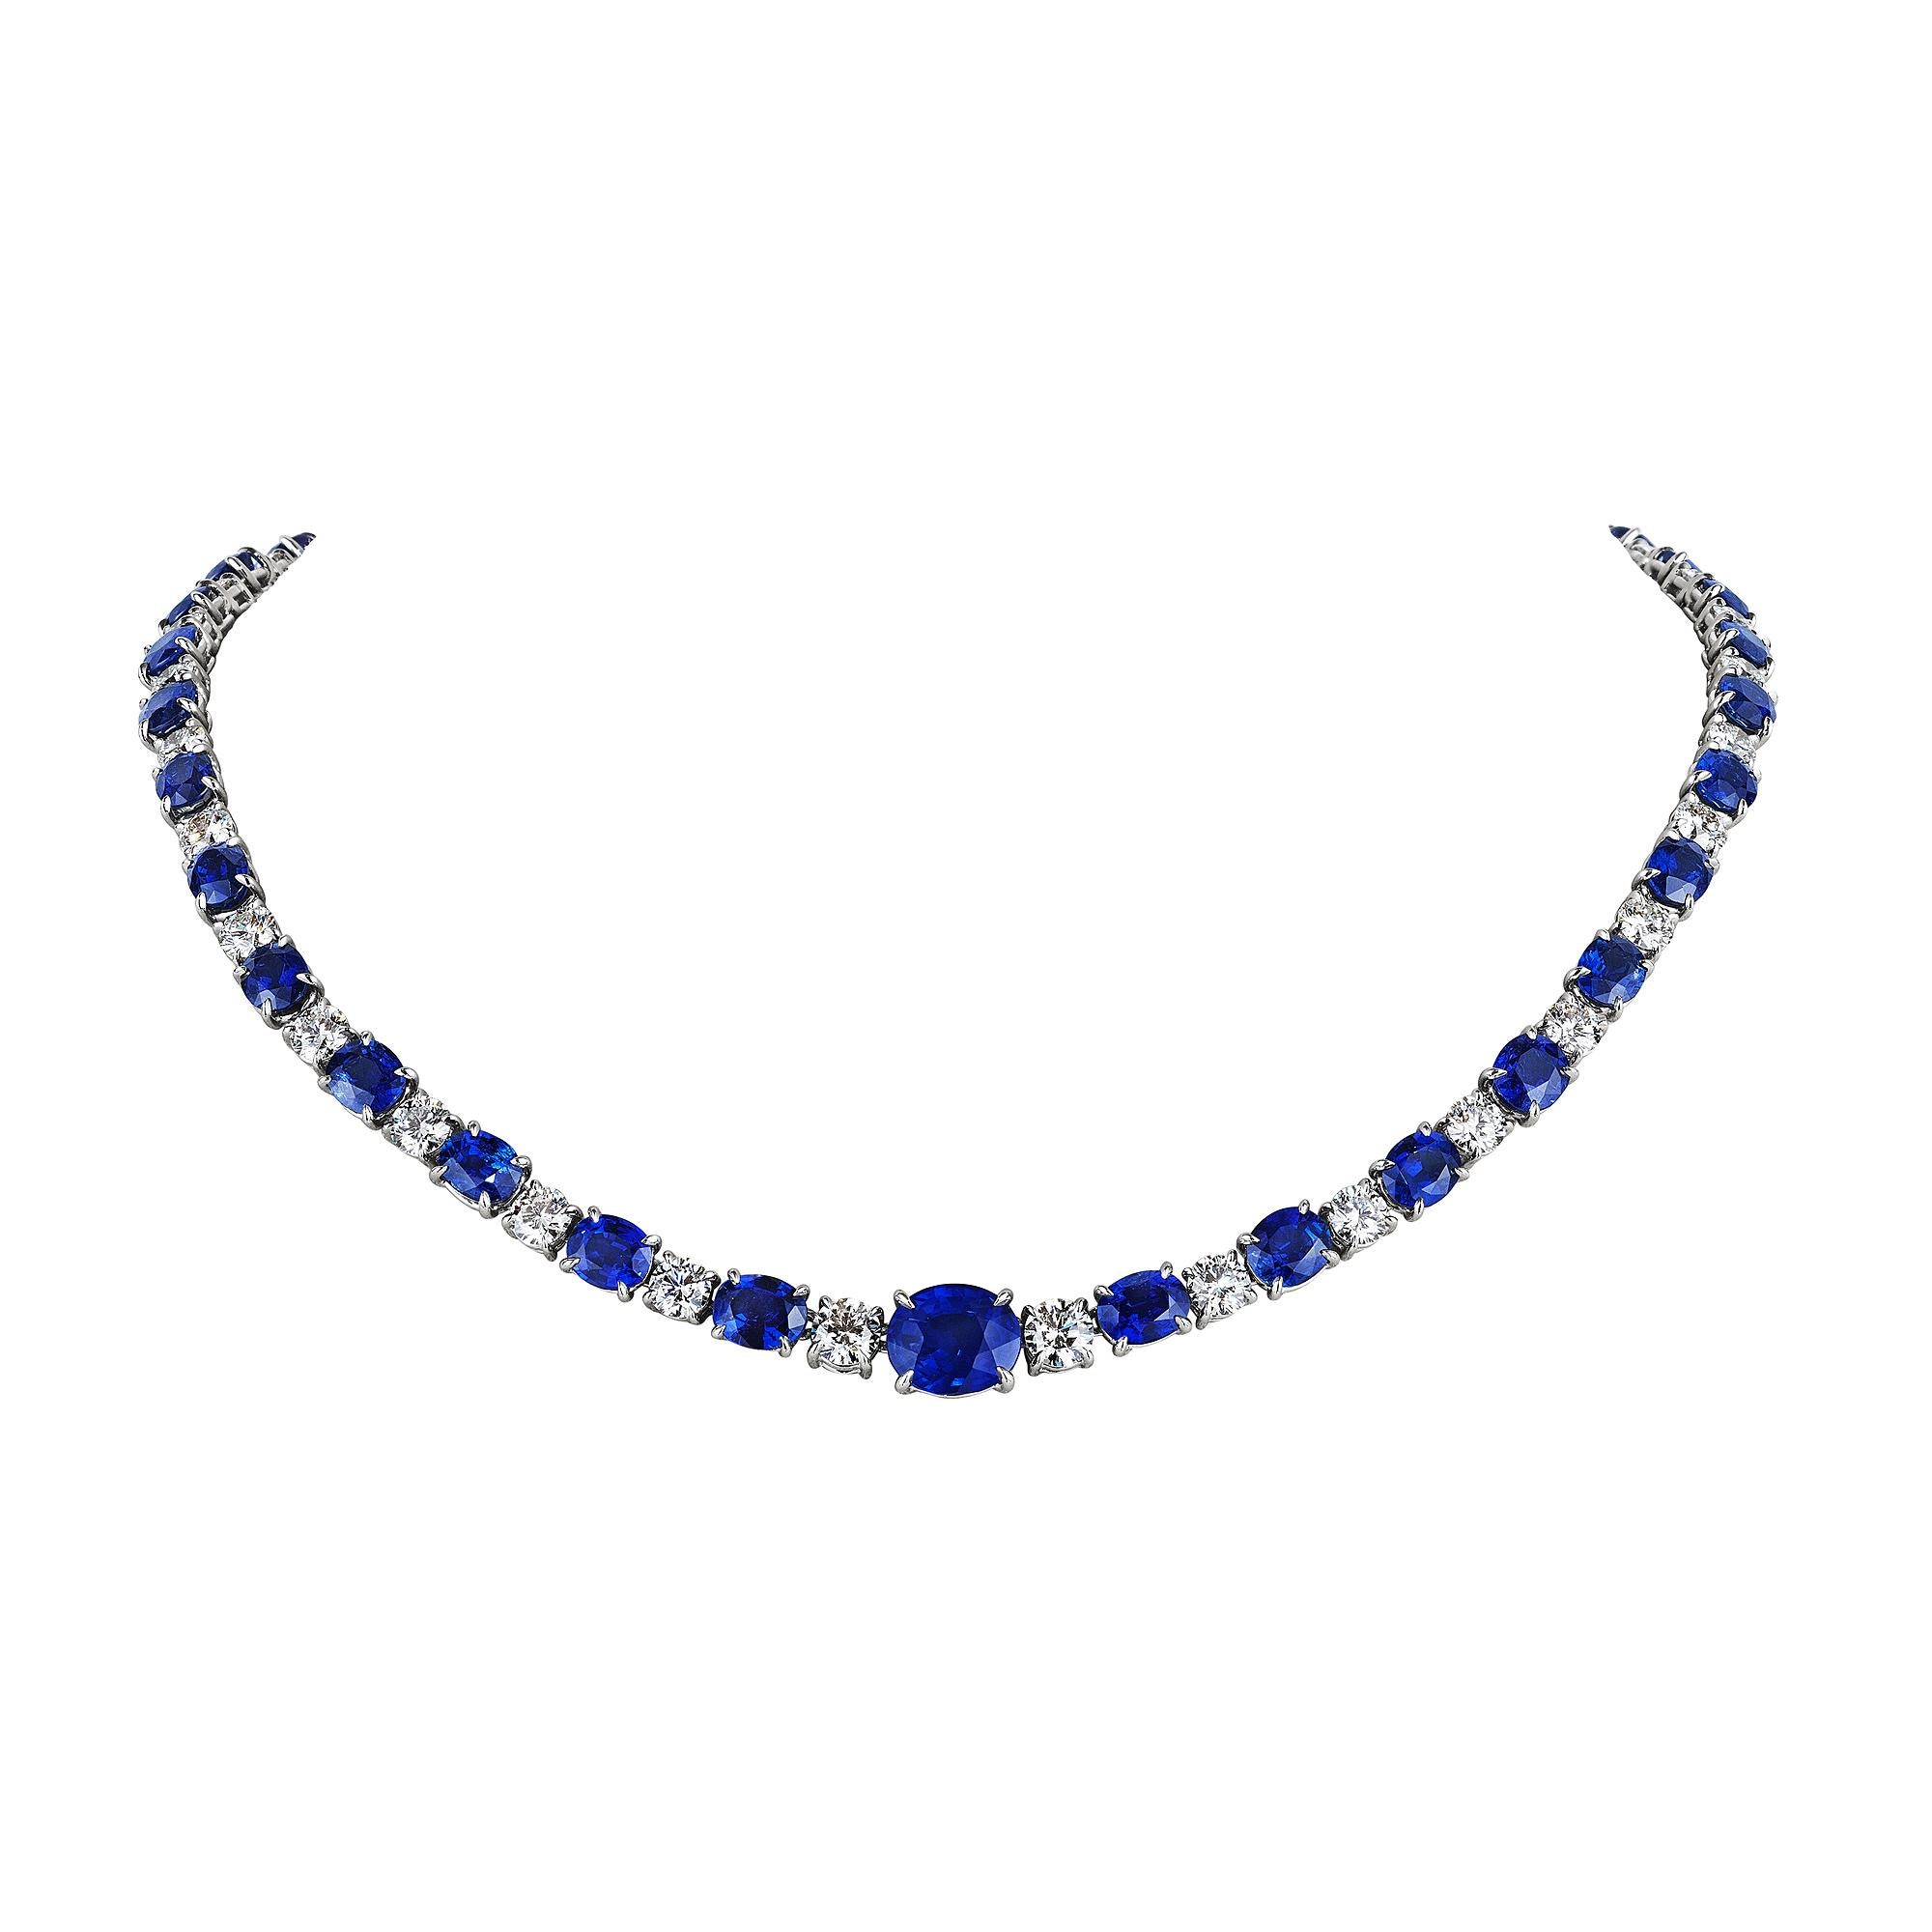 Surround yourself with the utmost in luxury and elegance with this Natural Burmese no heat oval cut sapphire and round cut diamond platinum necklace.  With 38 velvety deep blue sapphires alternating with 38 round brilliant ideal cut high color